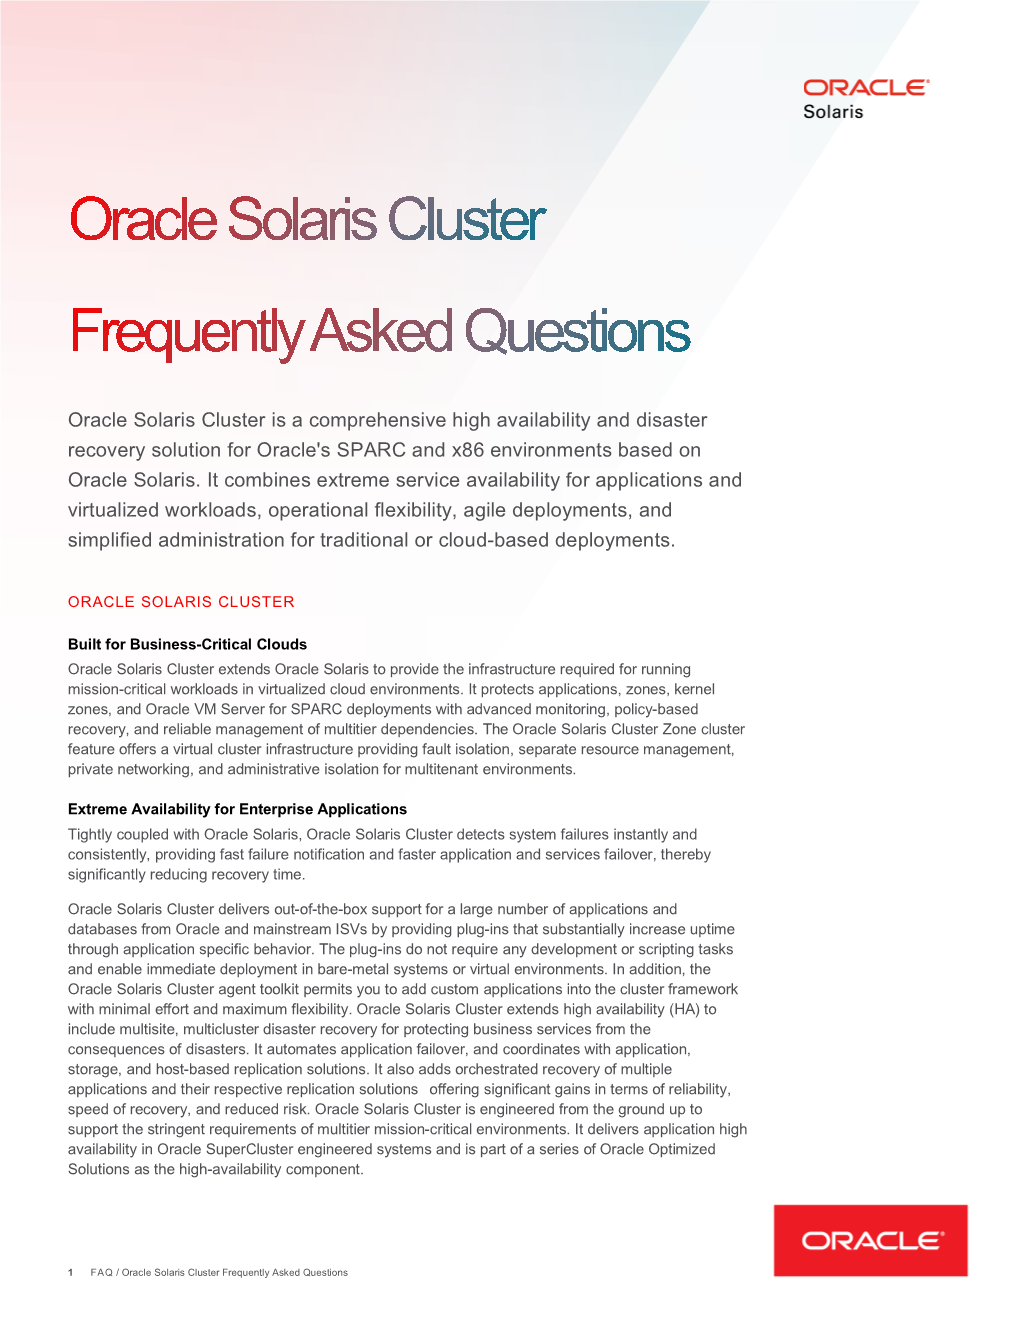 Oracle Solaris Cluster Frequently Asked Questions